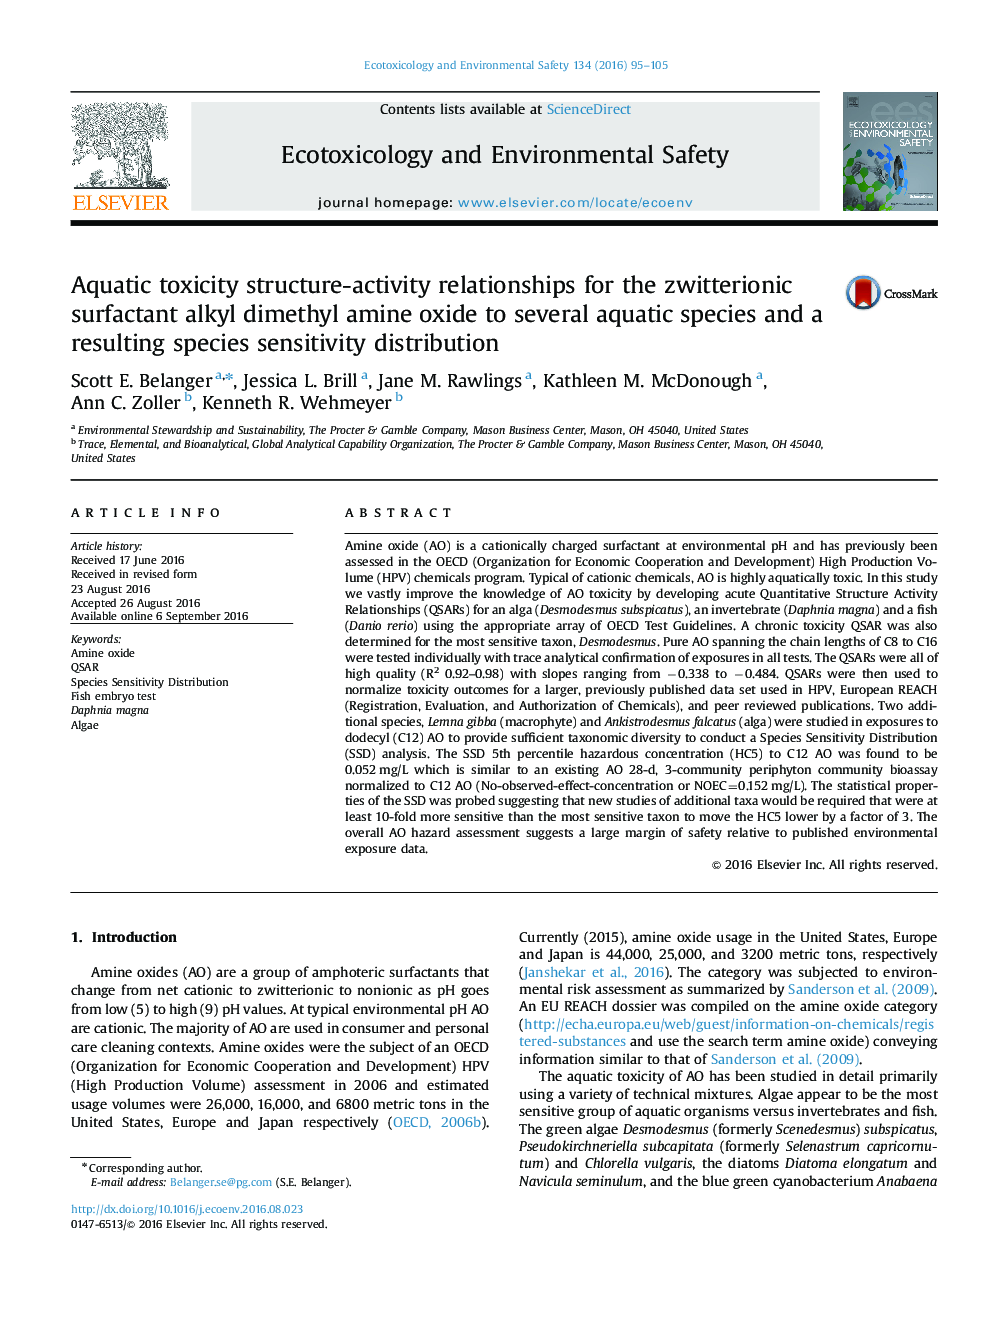 Aquatic toxicity structure-activity relationships for the zwitterionic surfactant alkyl dimethyl amine oxide to several aquatic species and a resulting species sensitivity distribution